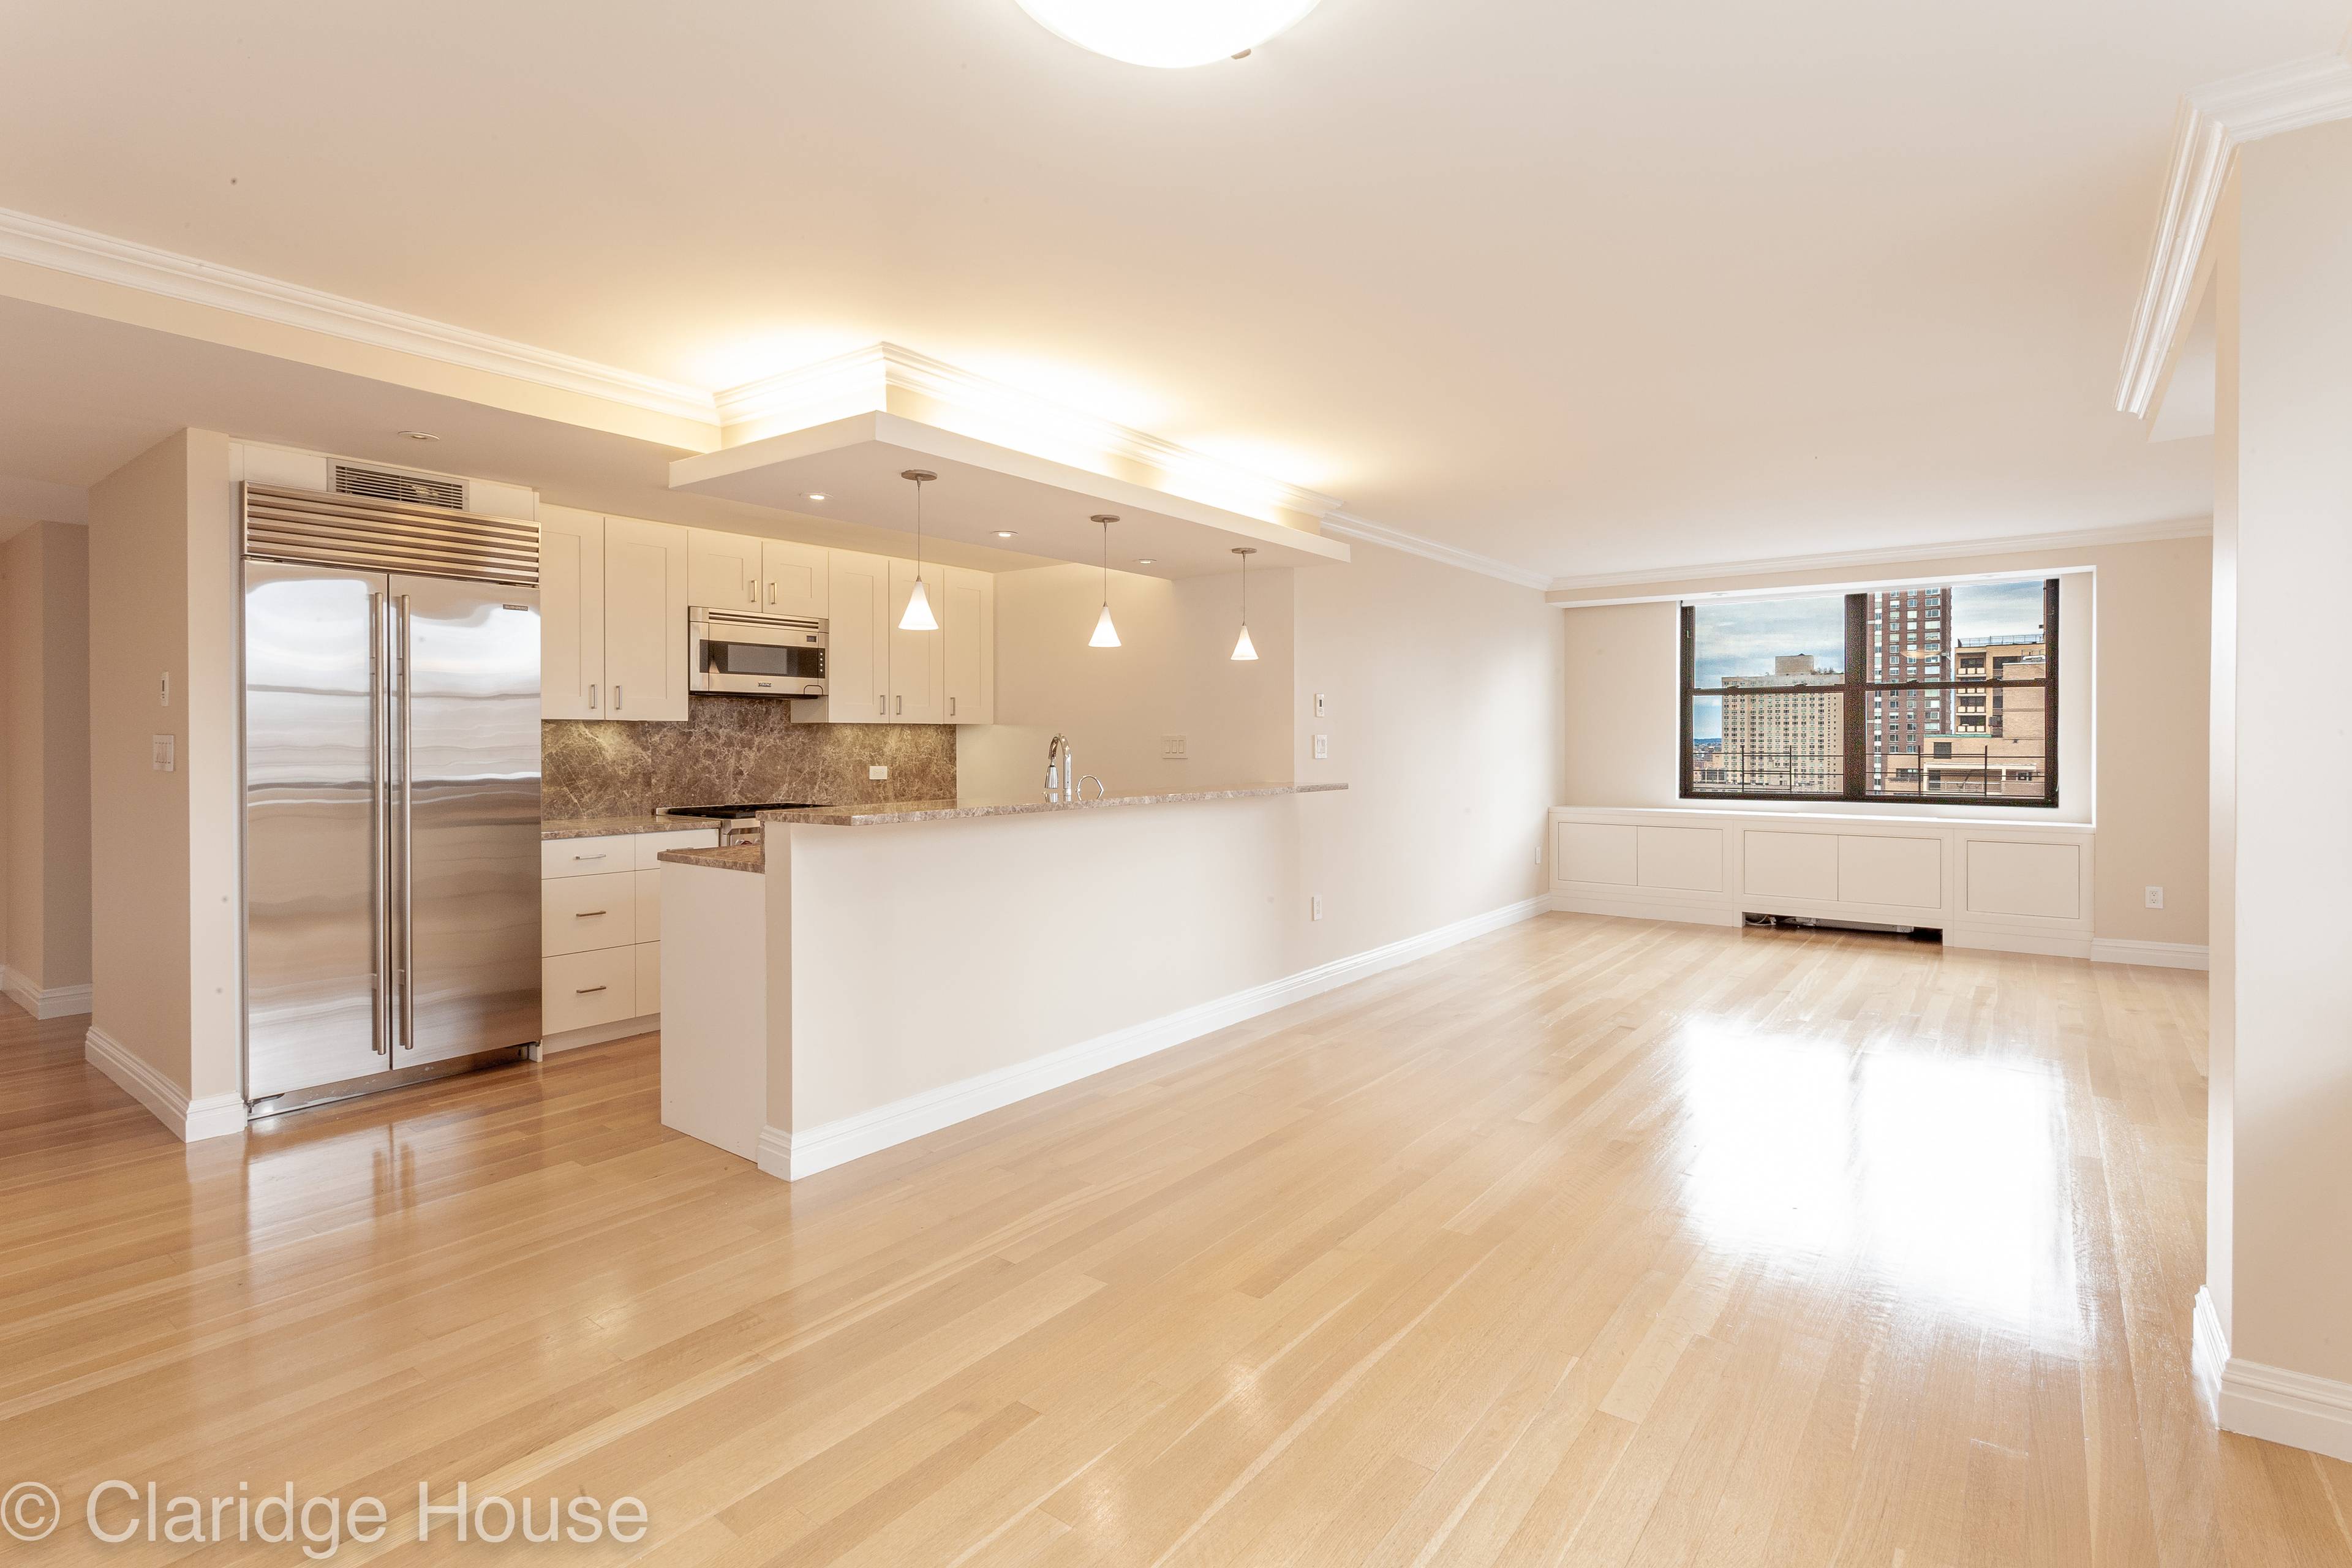 Spacious and Bright 2 bed/ 2.5 bath No fee Luxury Apartment in the Upper East Side with Upscale Finishes